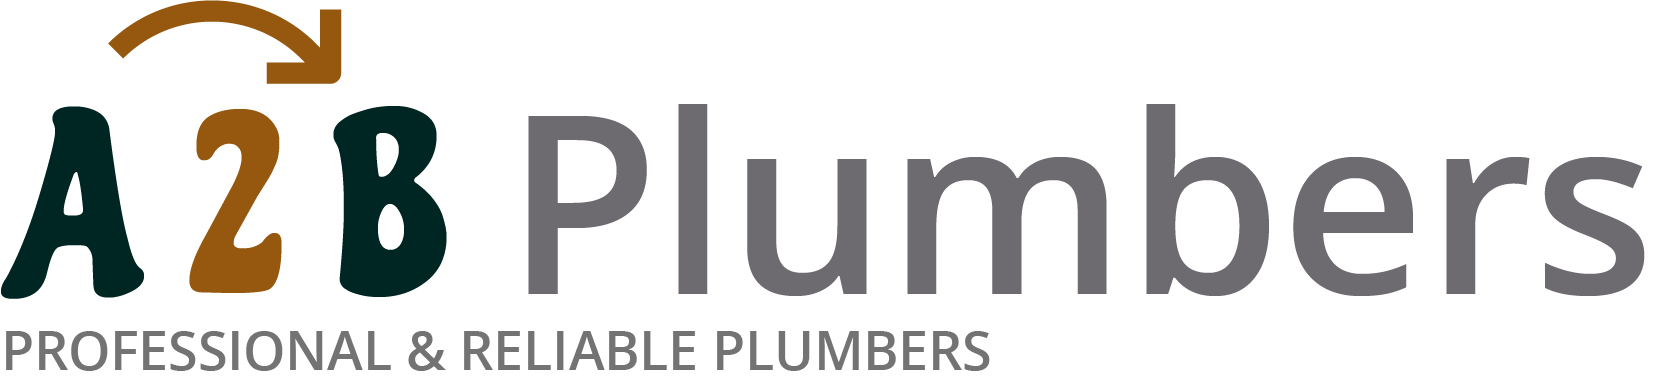 If you need a boiler installed, a radiator repaired or a leaking tap fixed, call us now - we provide services for properties in Elmbridge and the local area.